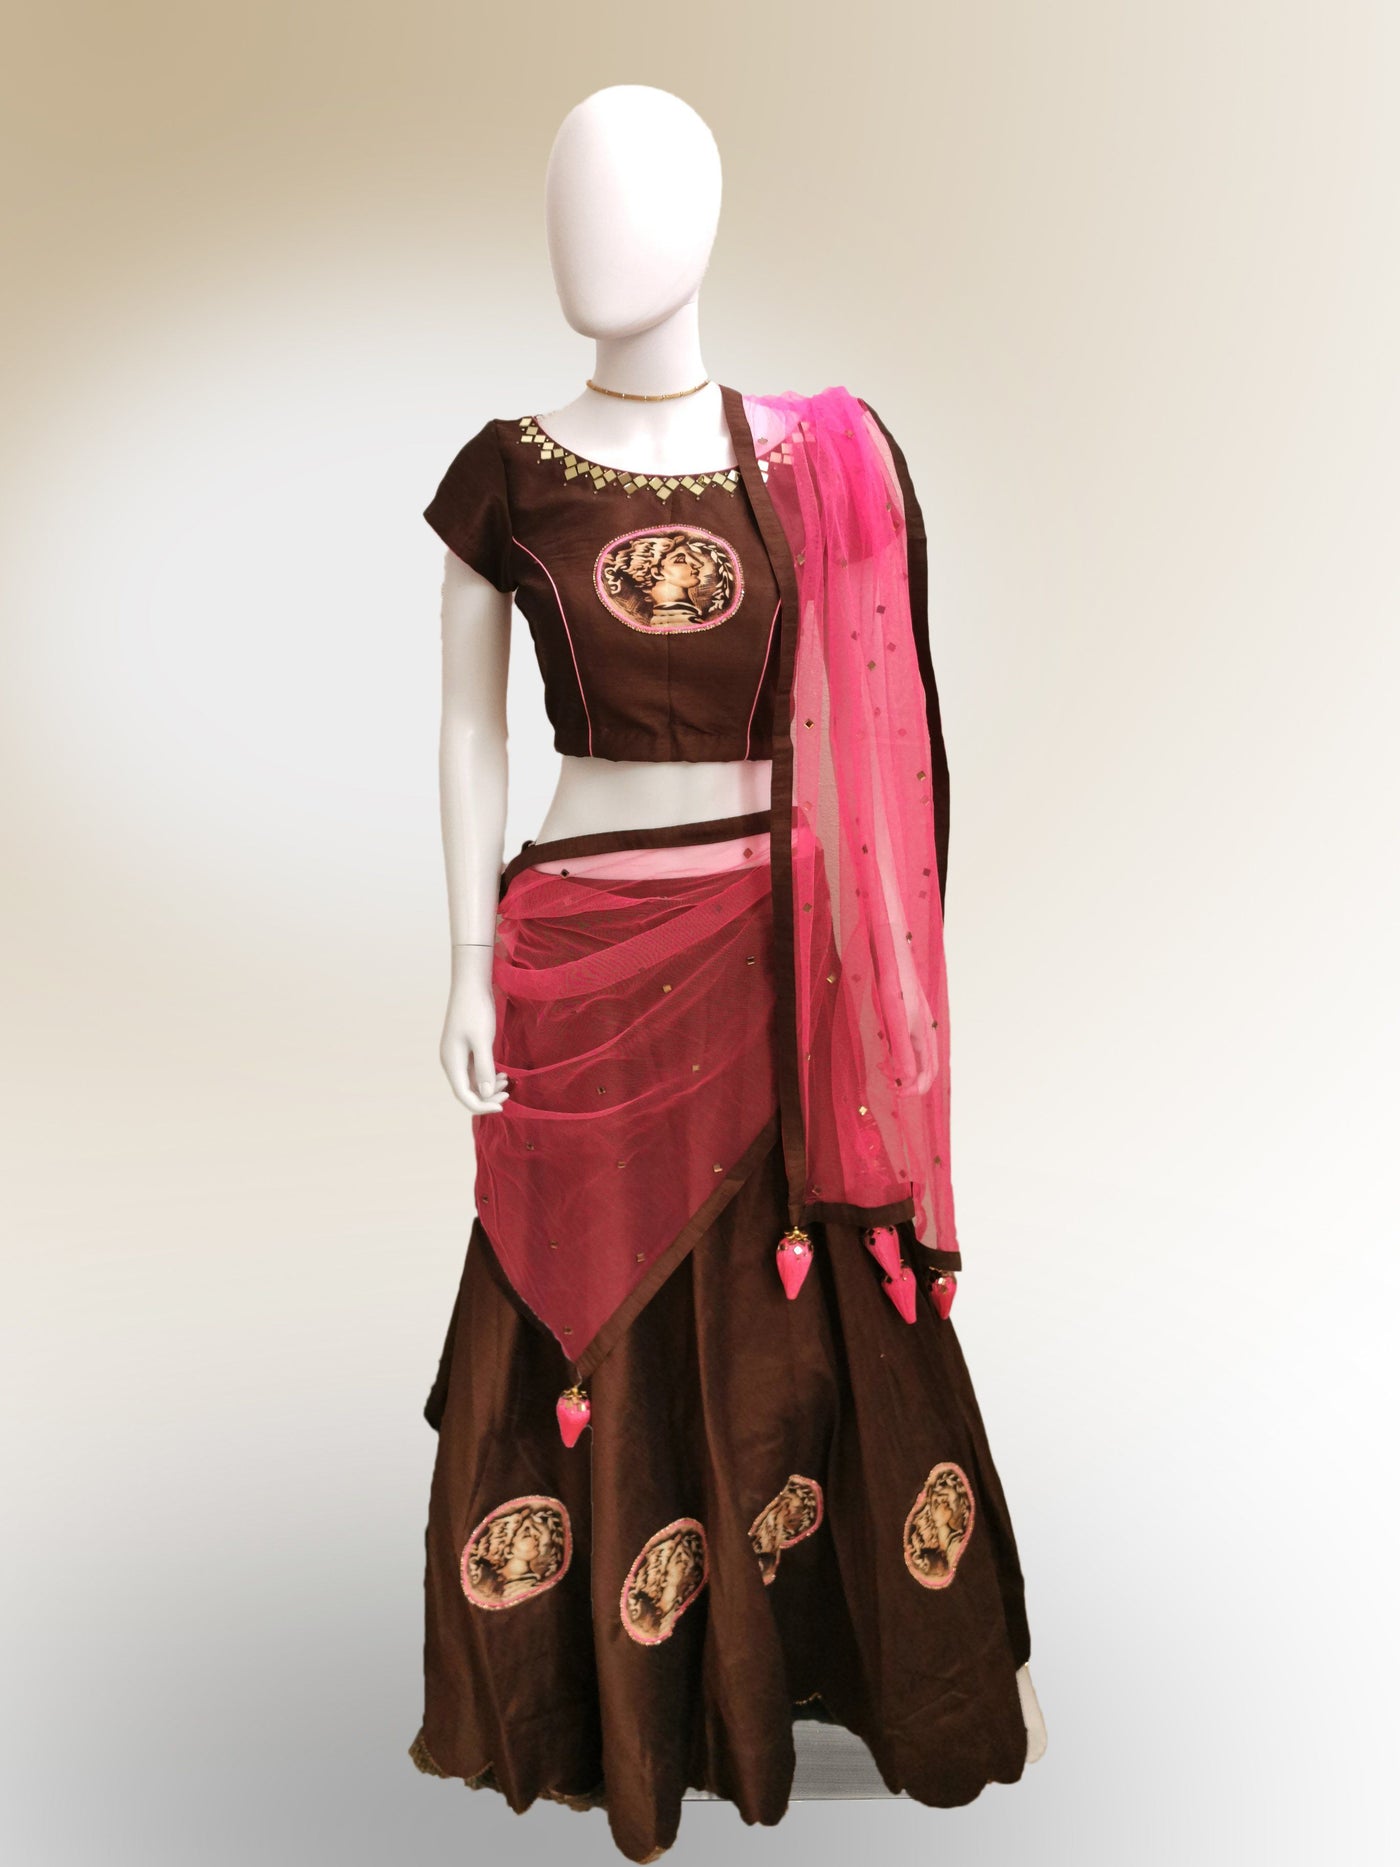 Lehenga in Mocha Brown - Indian Clothing in Denver, CO, Aurora, CO, Boulder, CO, Fort Collins, CO, Colorado Springs, CO, Parker, CO, Highlands Ranch, CO, Cherry Creek, CO, Centennial, CO, and Longmont, CO. Nationwide shipping USA - India Fashion X